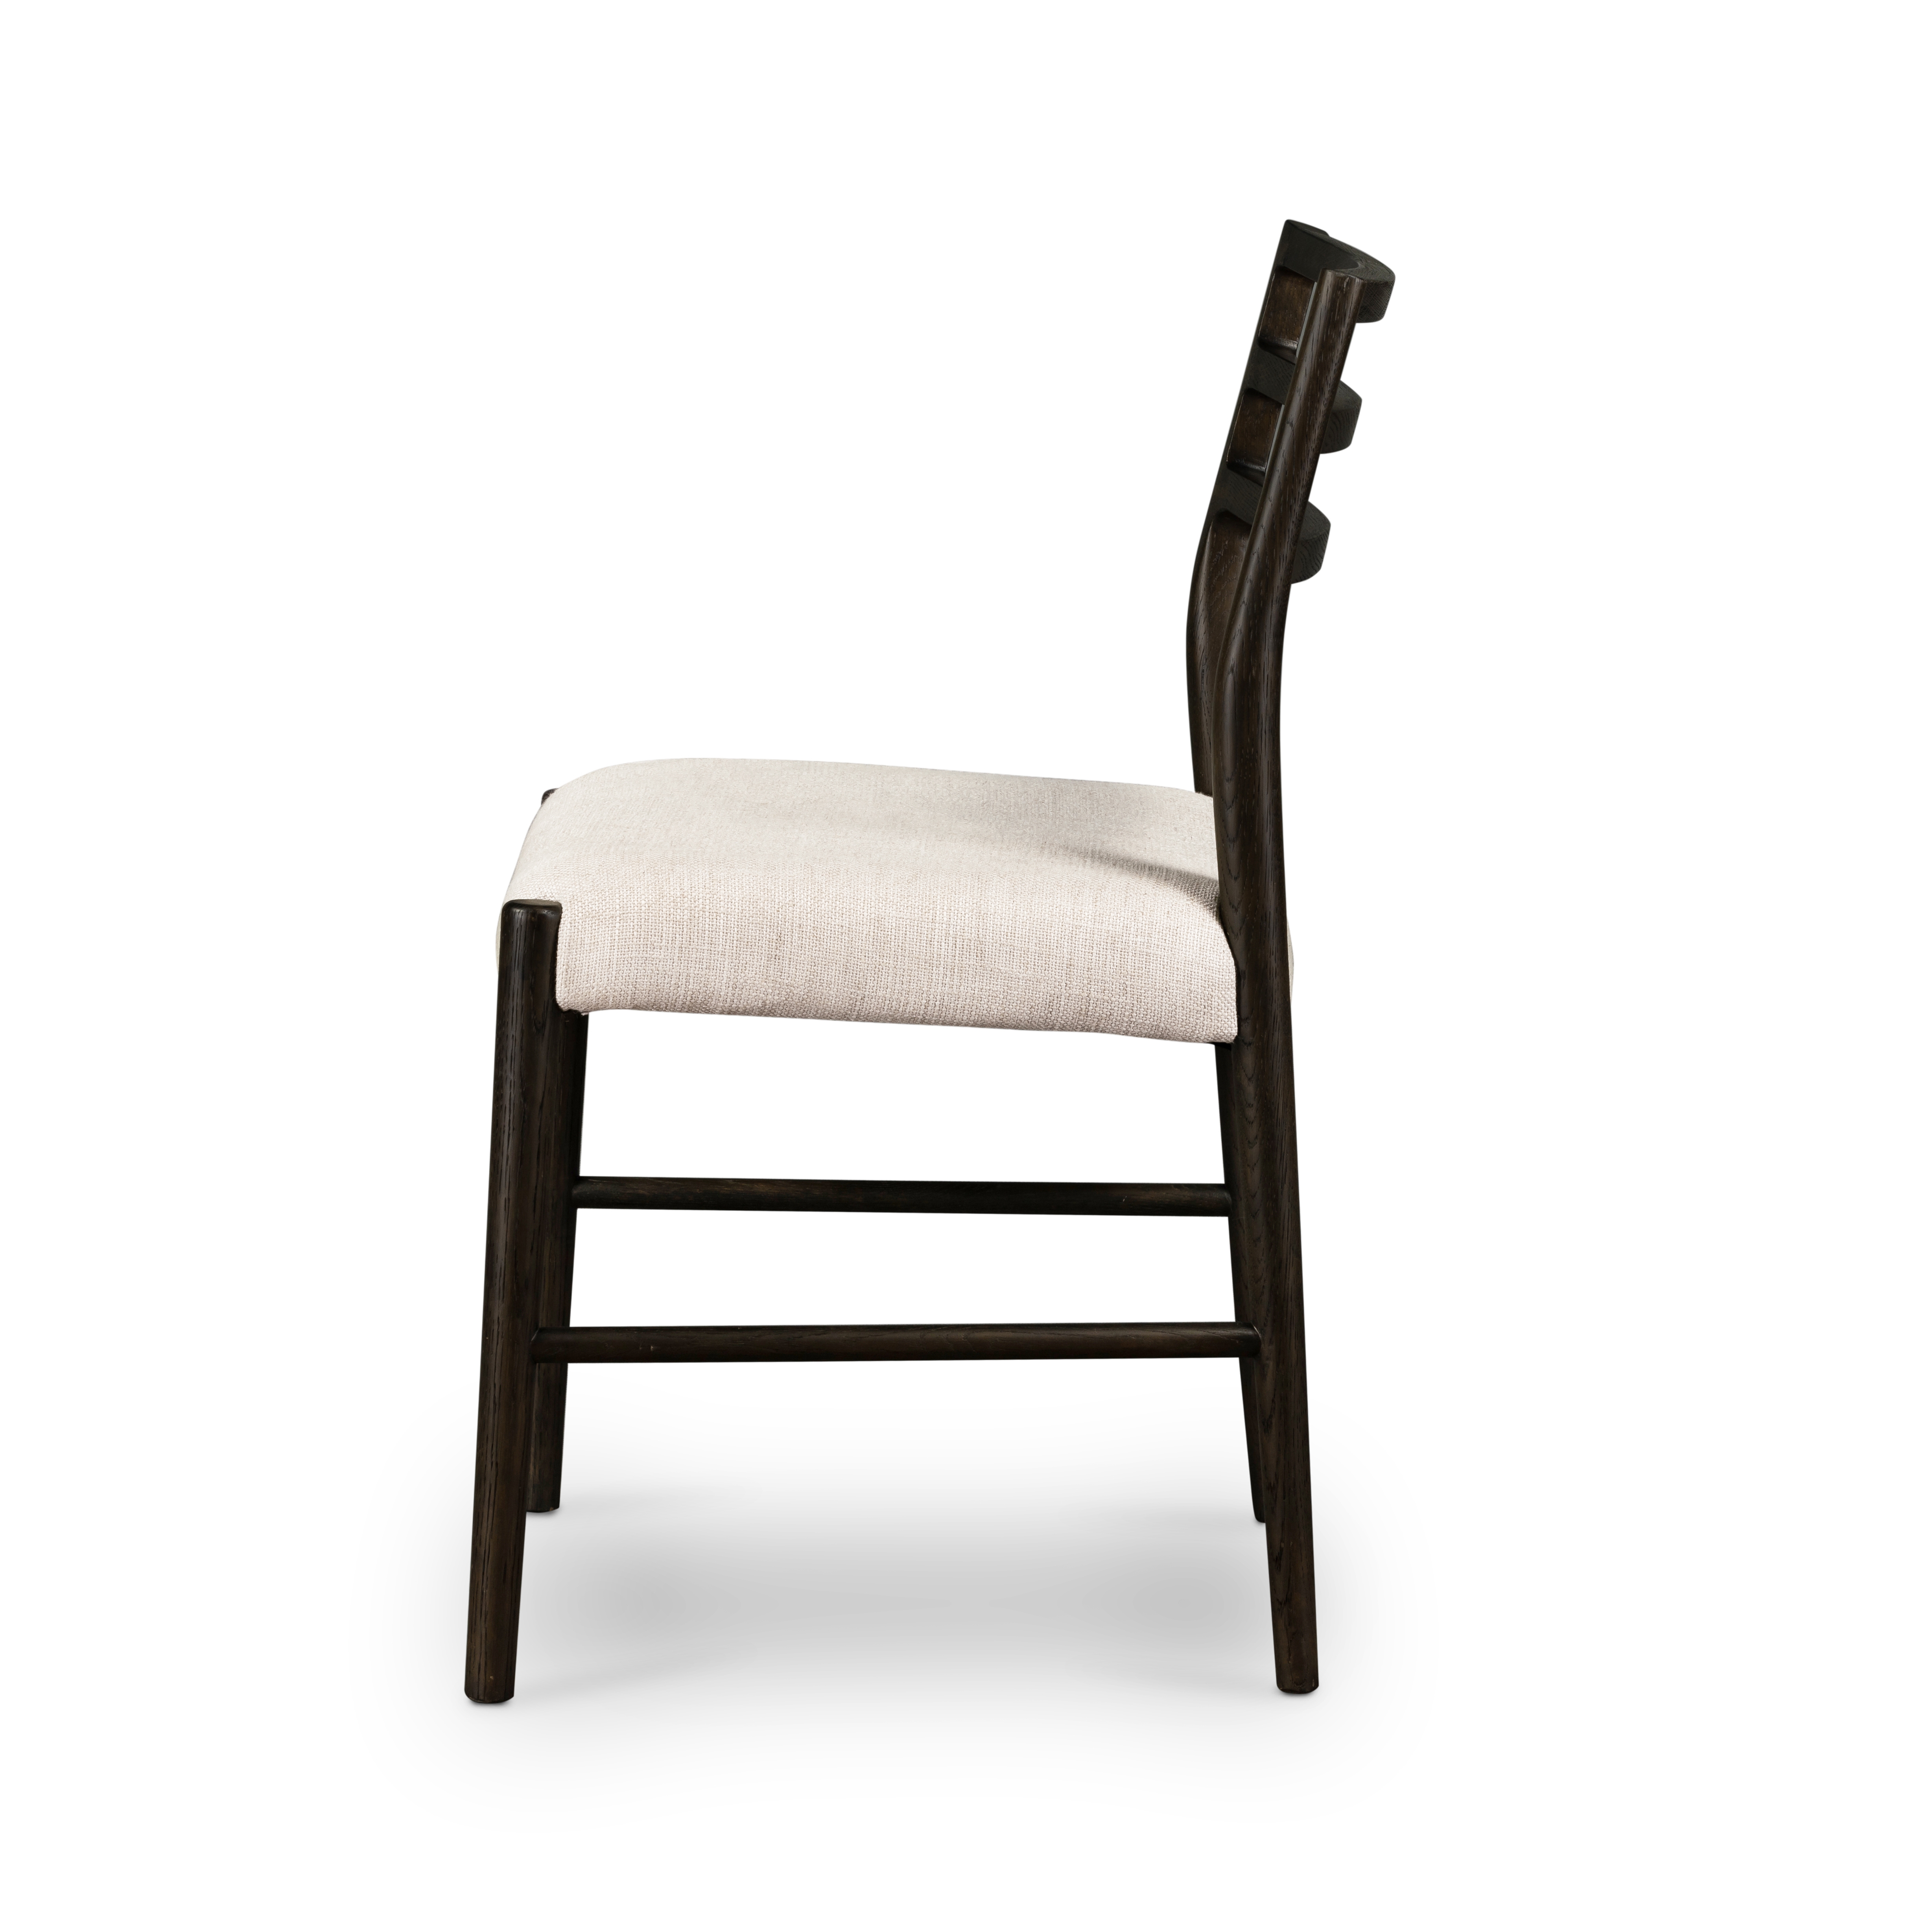 Glenmore Dining Chair-Essence Natural - Image 4